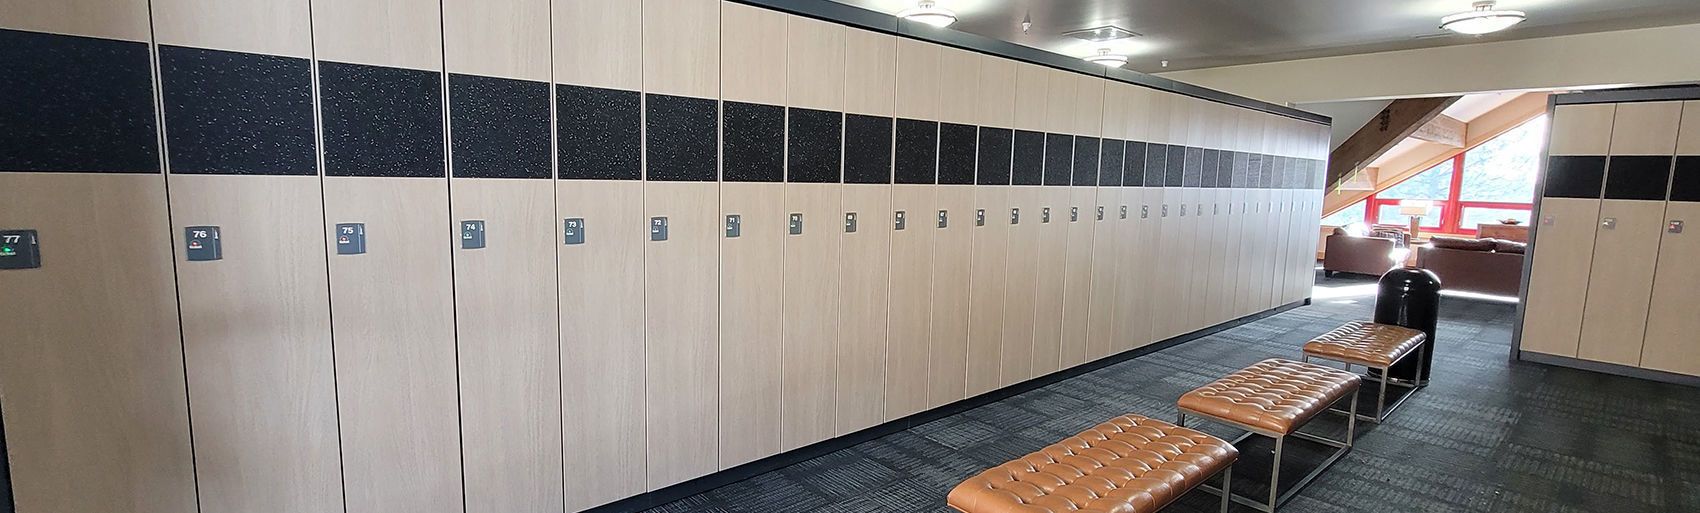 Lockers with benches